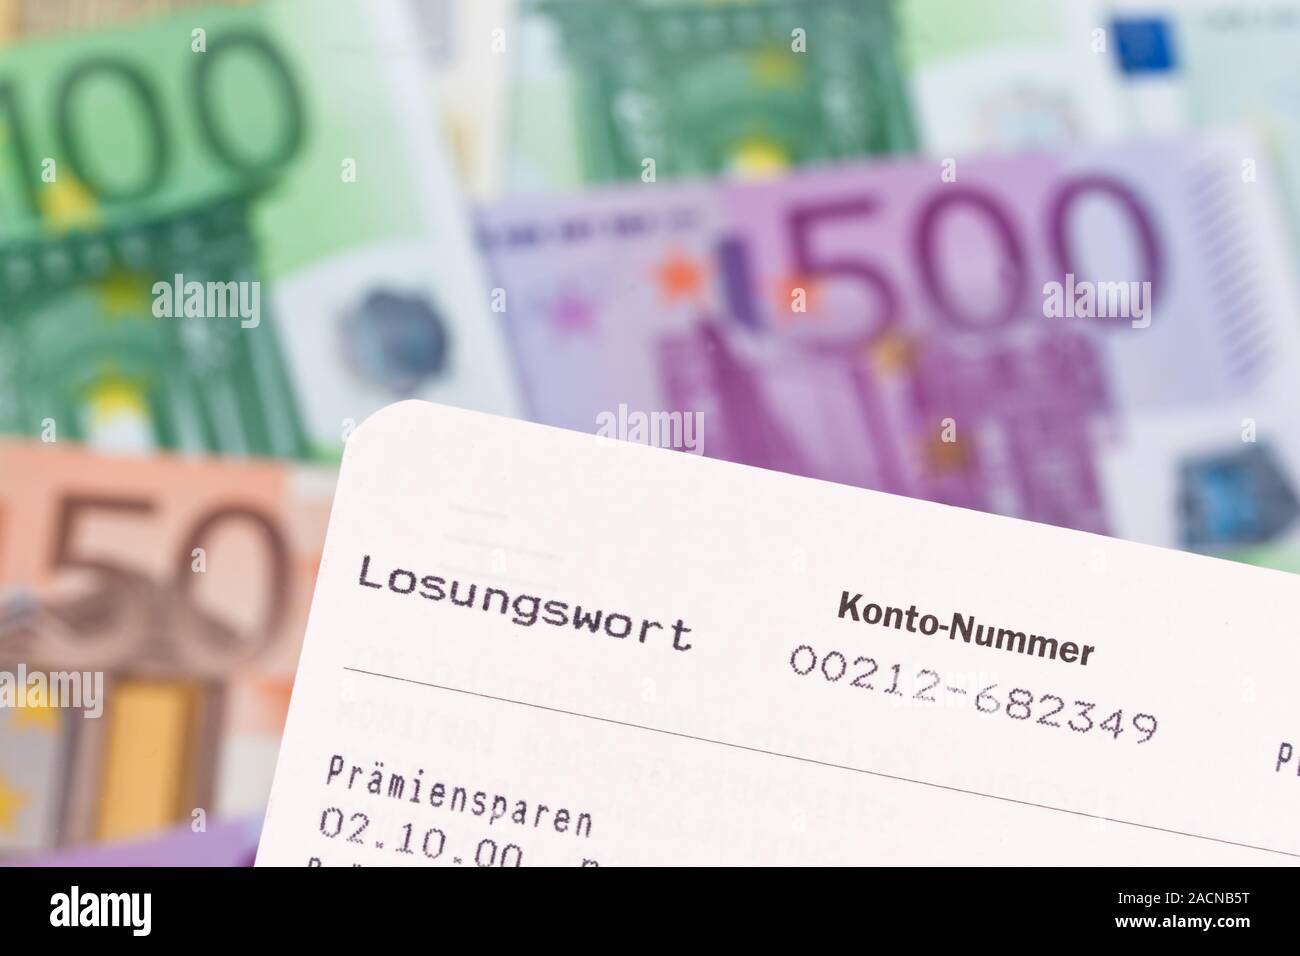 Euro banknotes with passbook Stock Photo